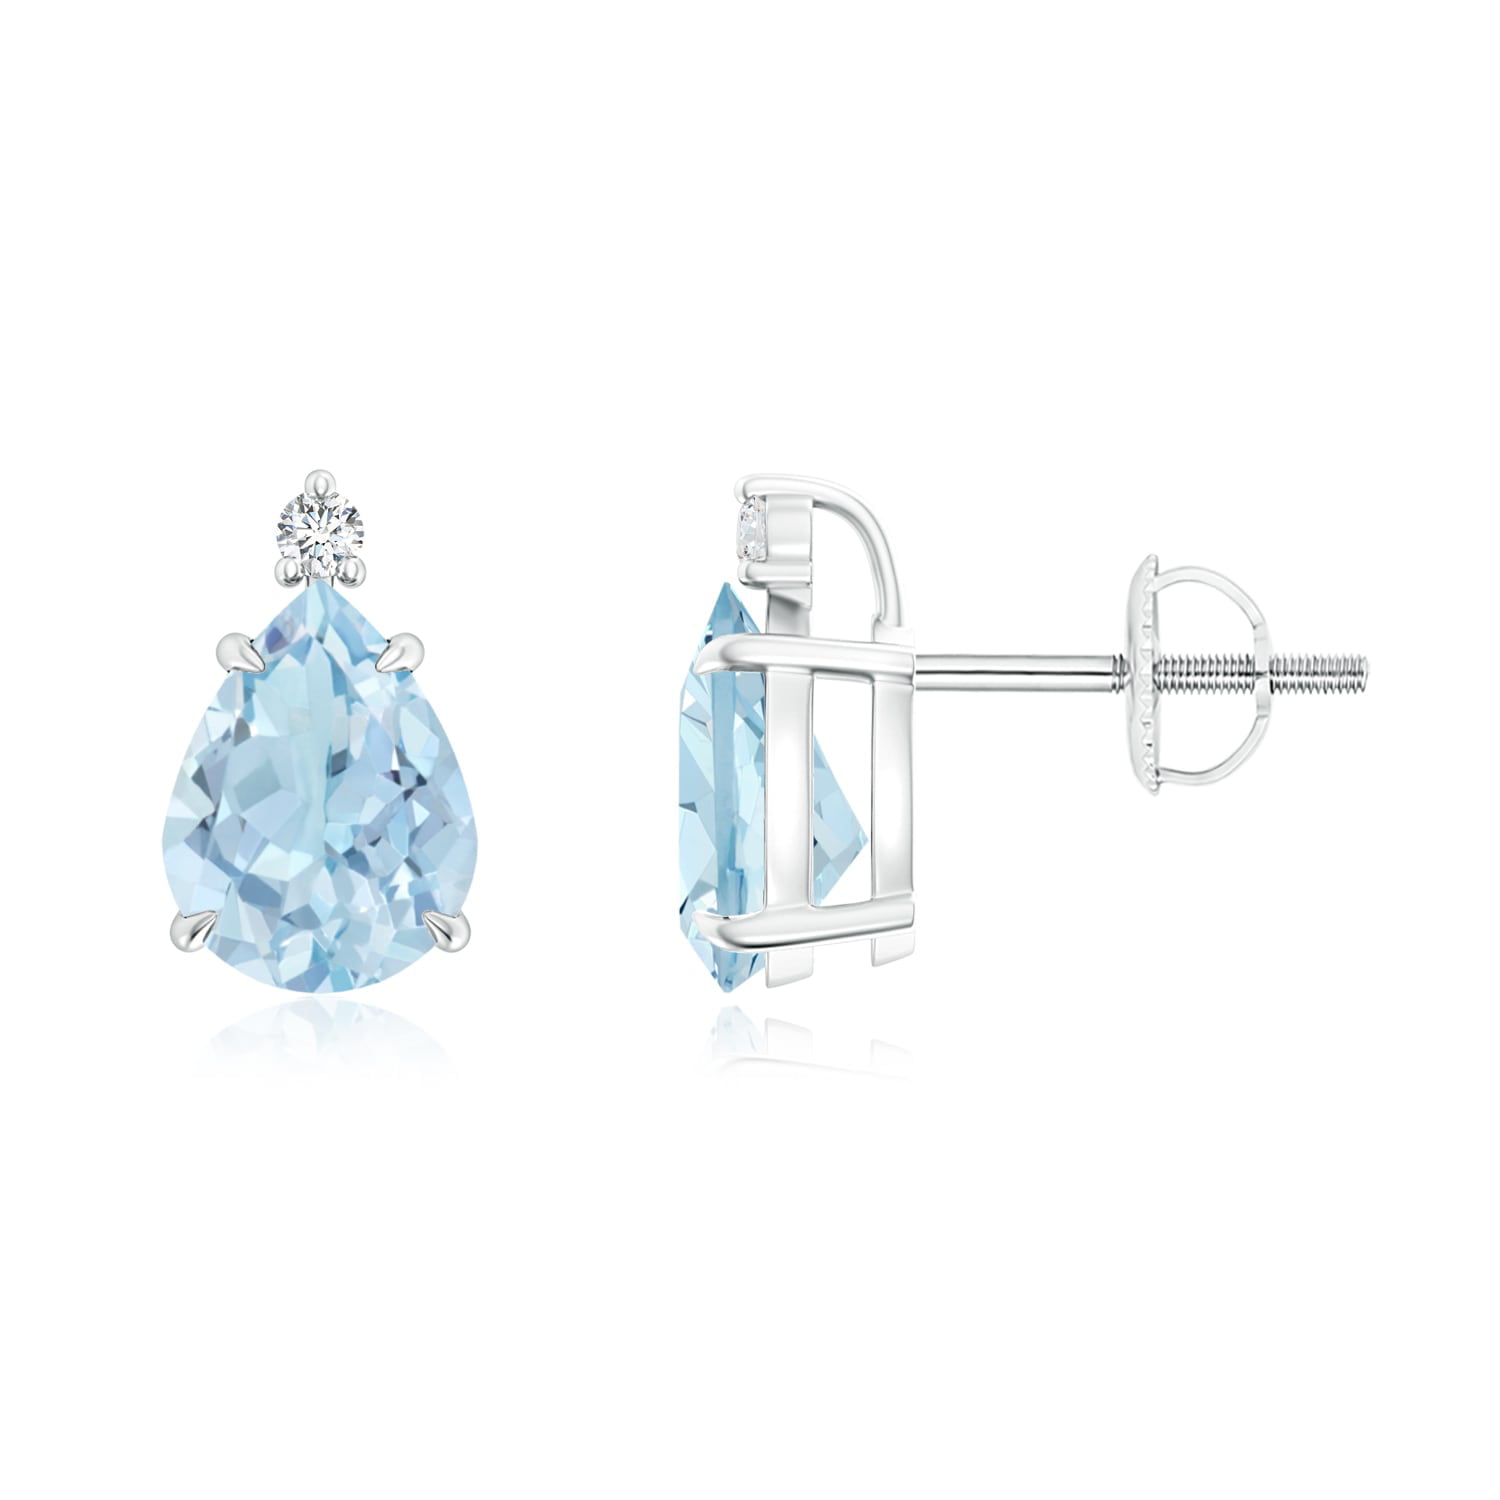 1.7 Carats Classic Claw-Set Pear Aquamarine Solitaire Stud Earrings For  Women in 14K White Gold (8x6mm Aquamarine)